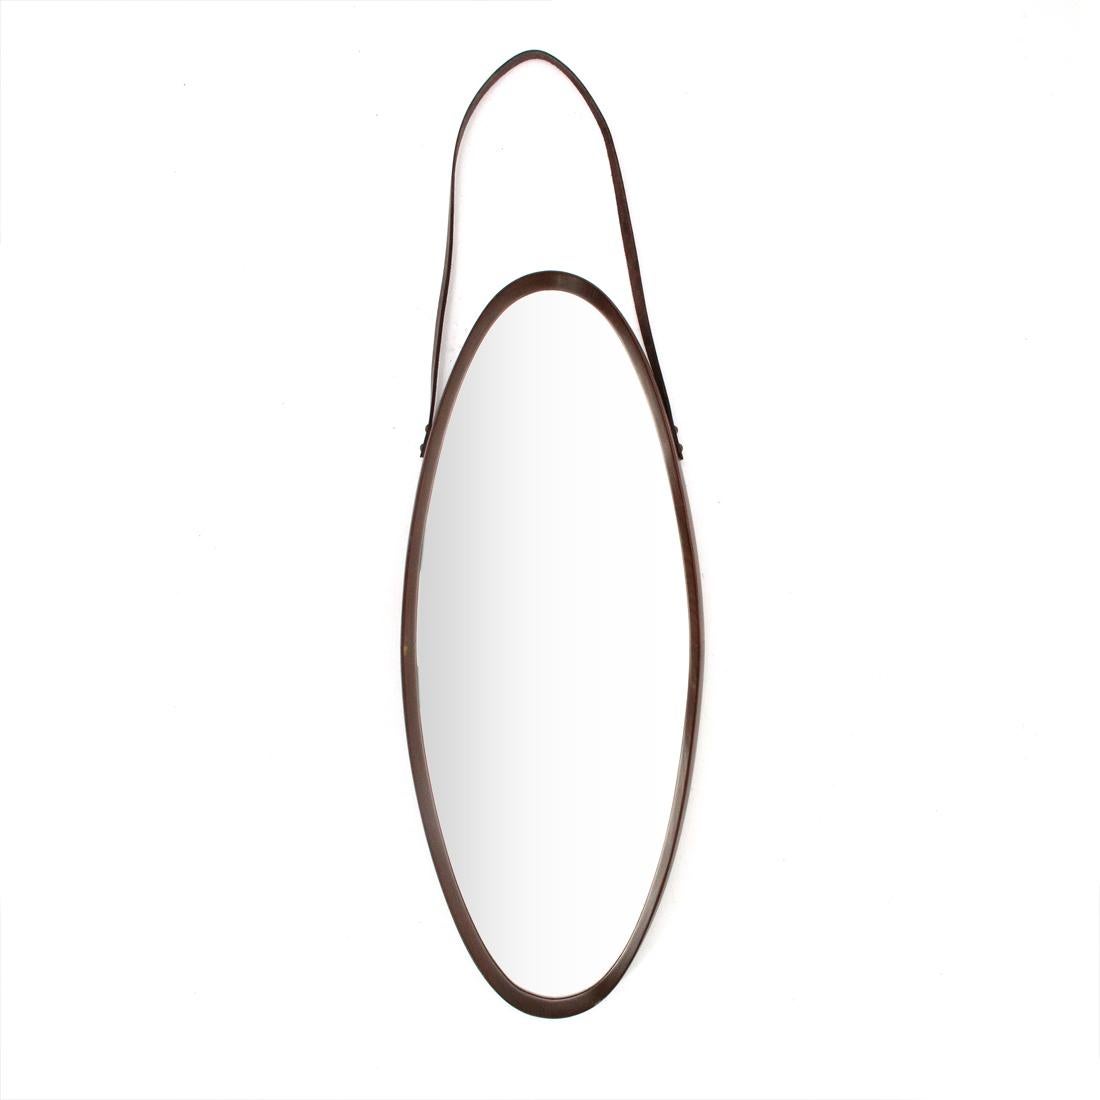 Italian manufacturing mirror produced in the 1960s.
Oval-shaped teak frame.
Mirror glass surface.
Leather cord.
Good general conditions, some signs due to normal use over time, lack of frame.

Dimensions: Length 34 cm, depth 4 cm, height 84 cm.